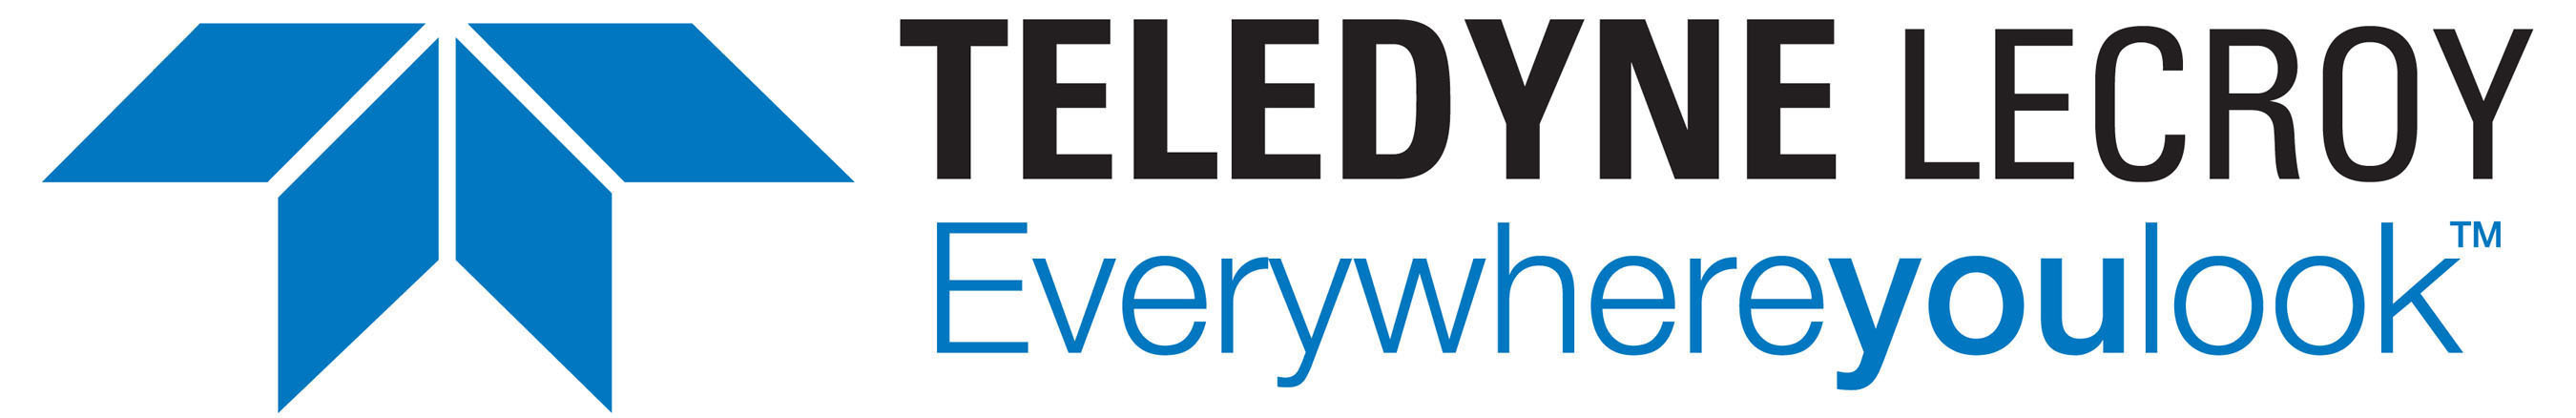 Teledyne LeCroy is a leading provider of oscilloscopes, protocol analyzers and related test and measurement solutions that enable companies across a wide range of industries to design and test electronic devices of all types.